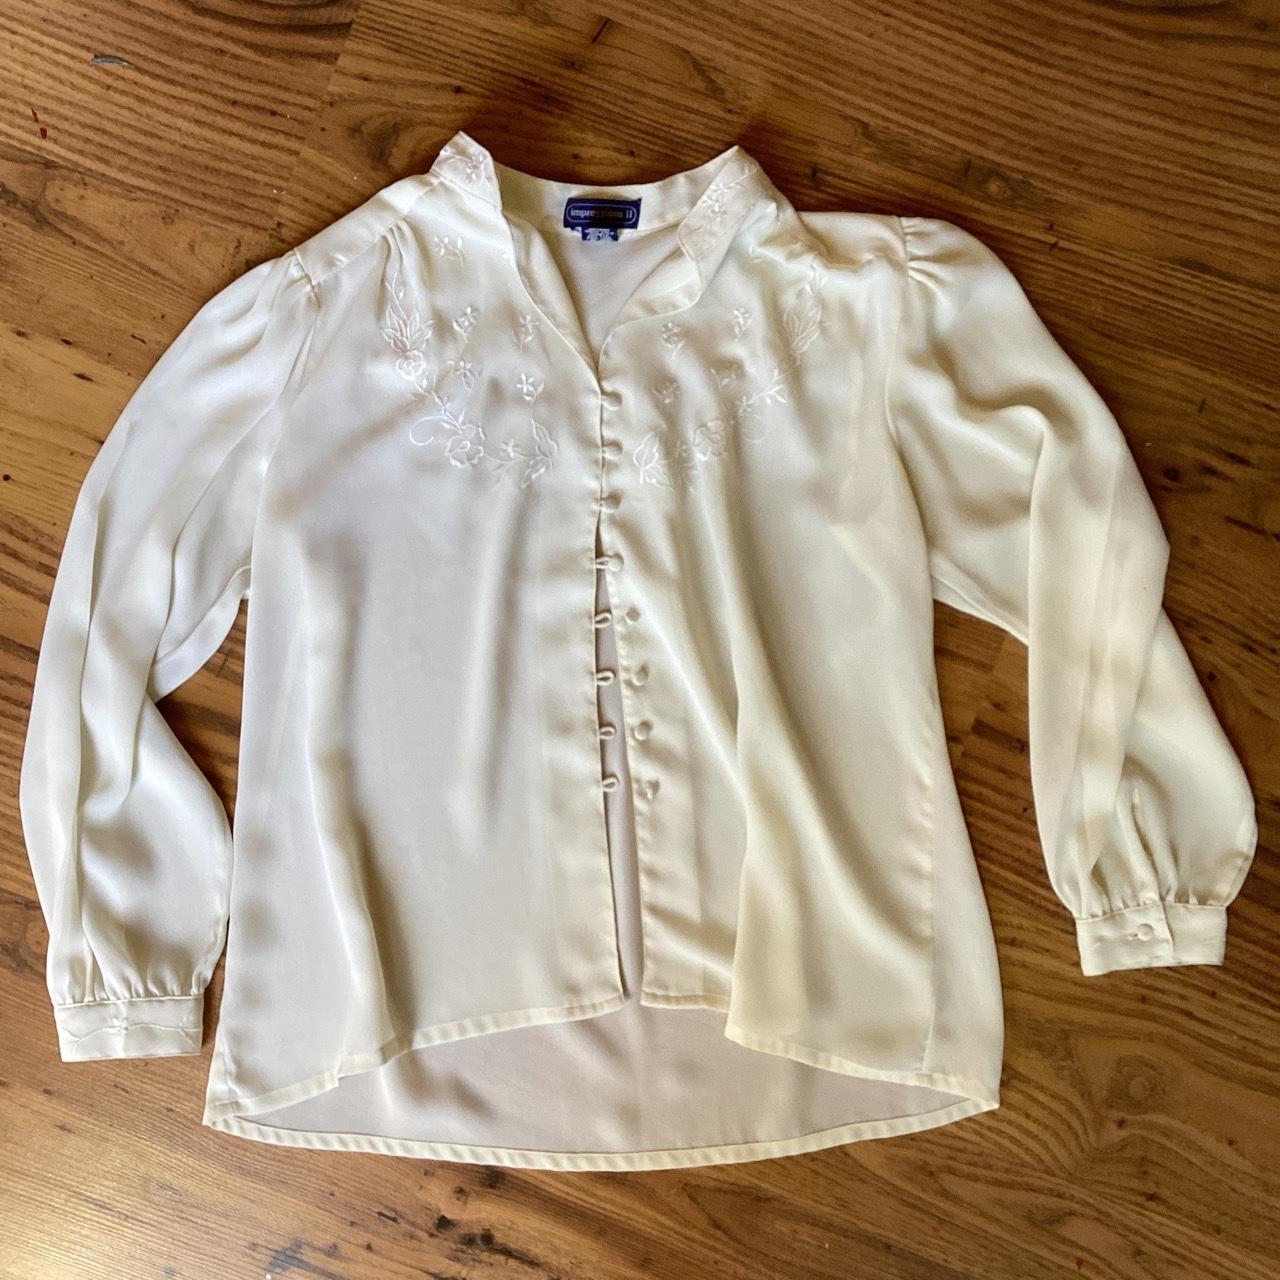 Impressions Women's Cream and White Blouse (2)